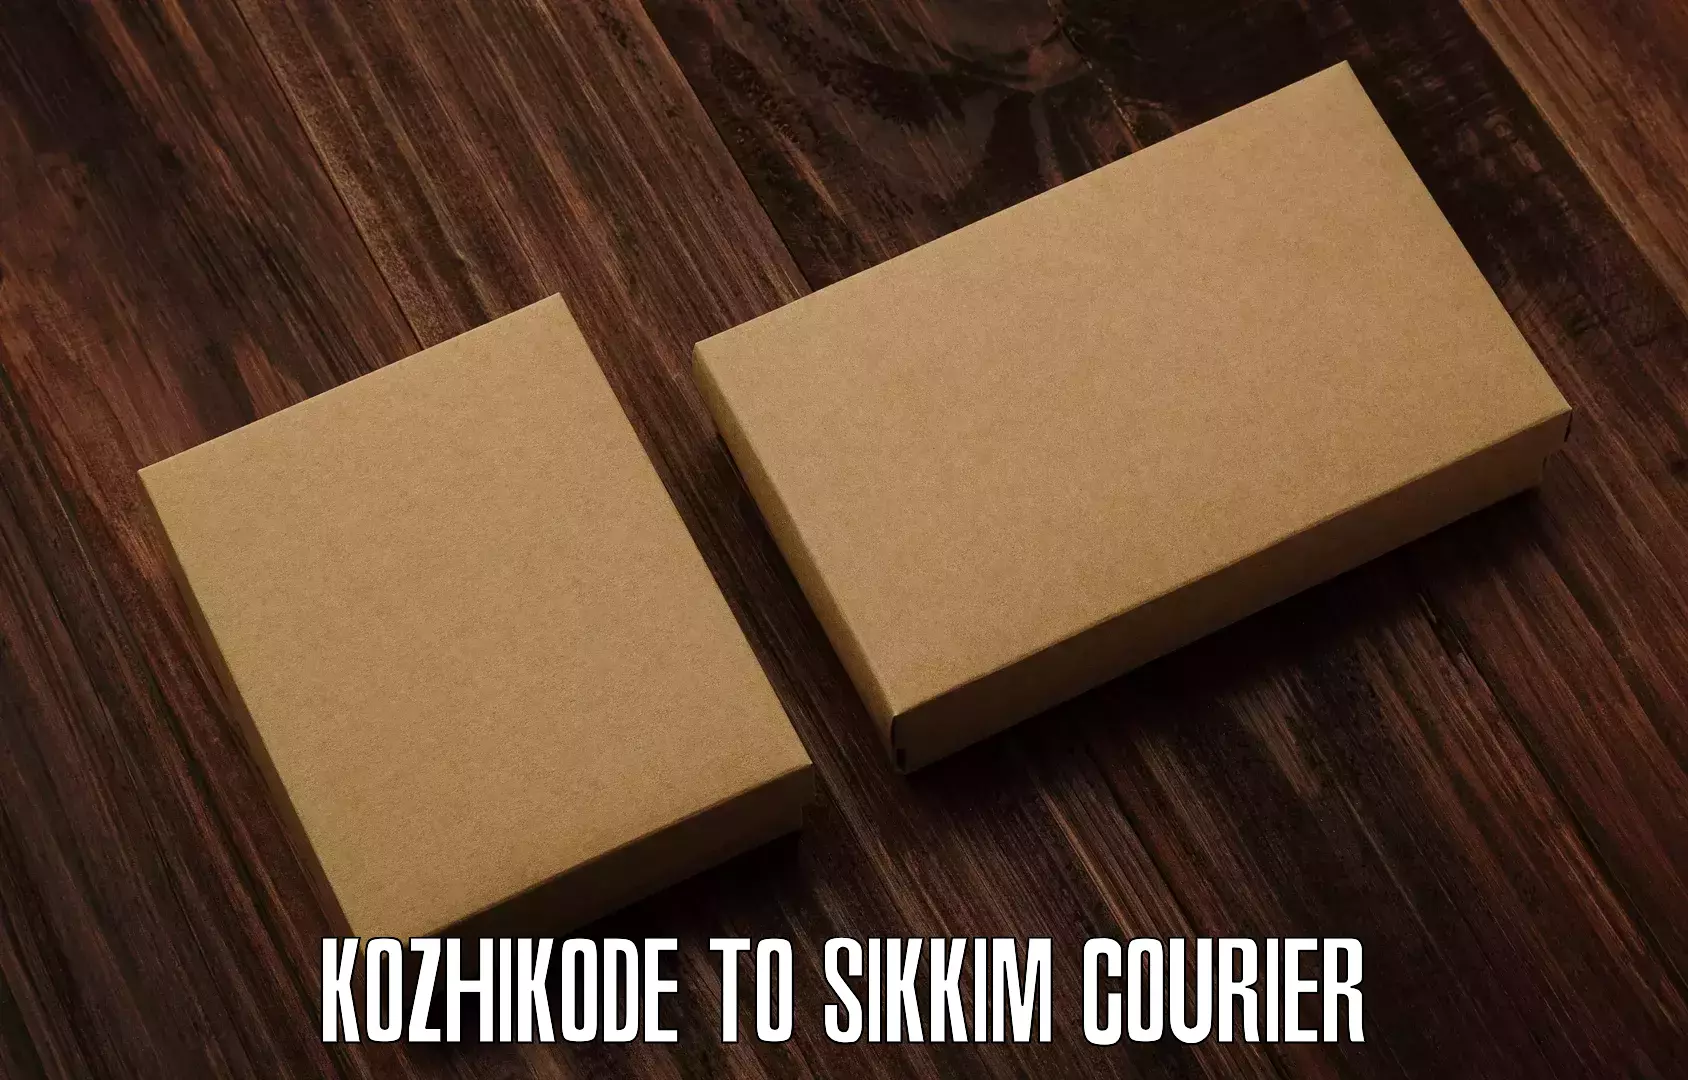 Global courier networks Kozhikode to Pelling